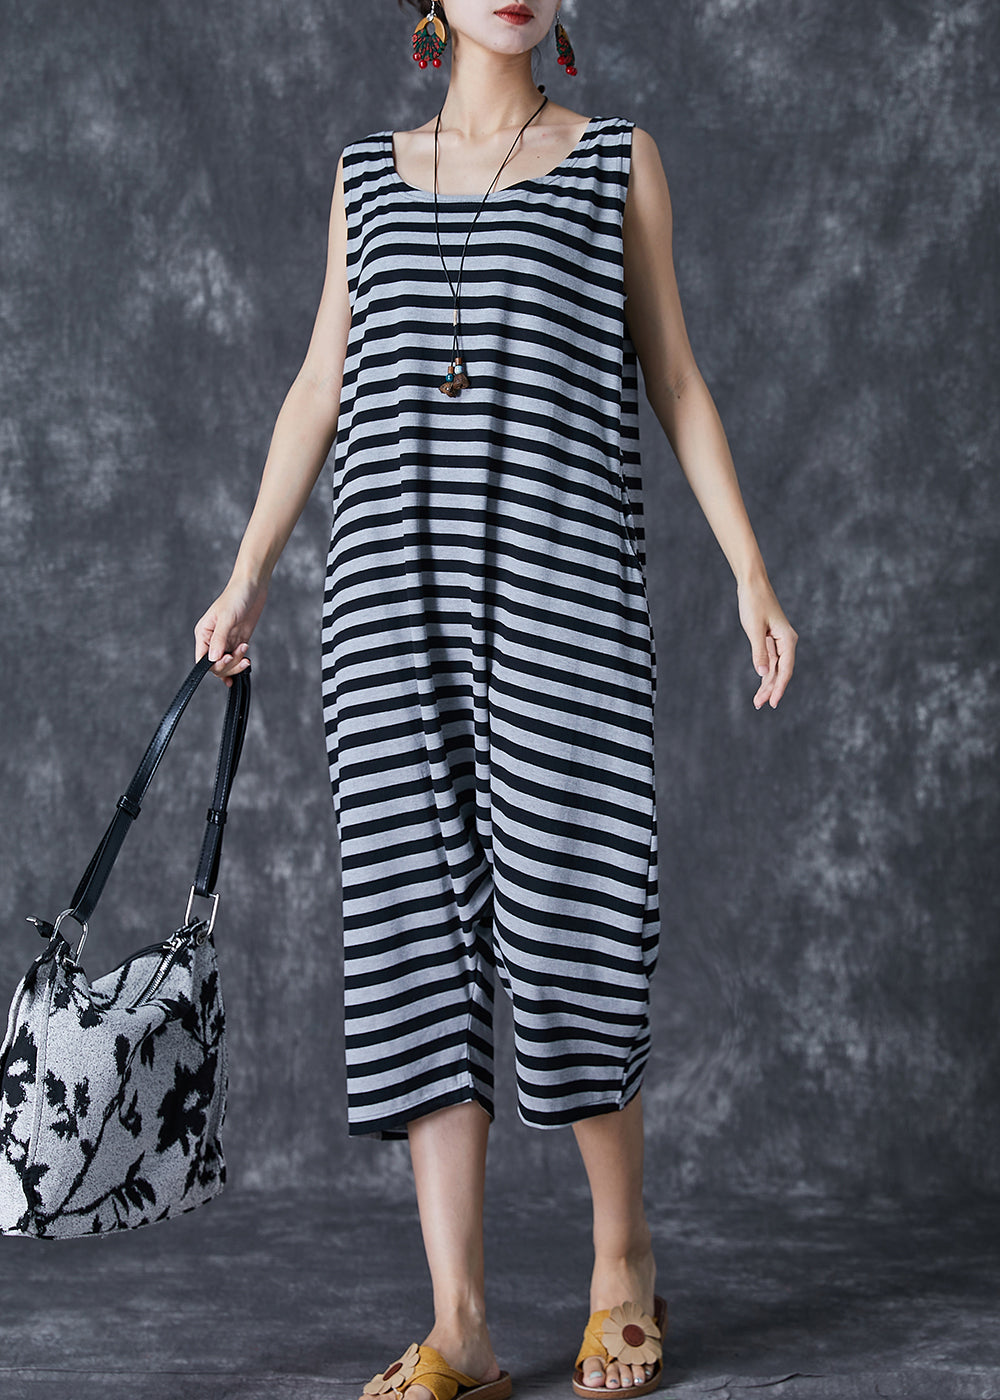 Modern Grey O-Neck Striped Cotton Overalls Jumpsuit Sleeveless LY7096